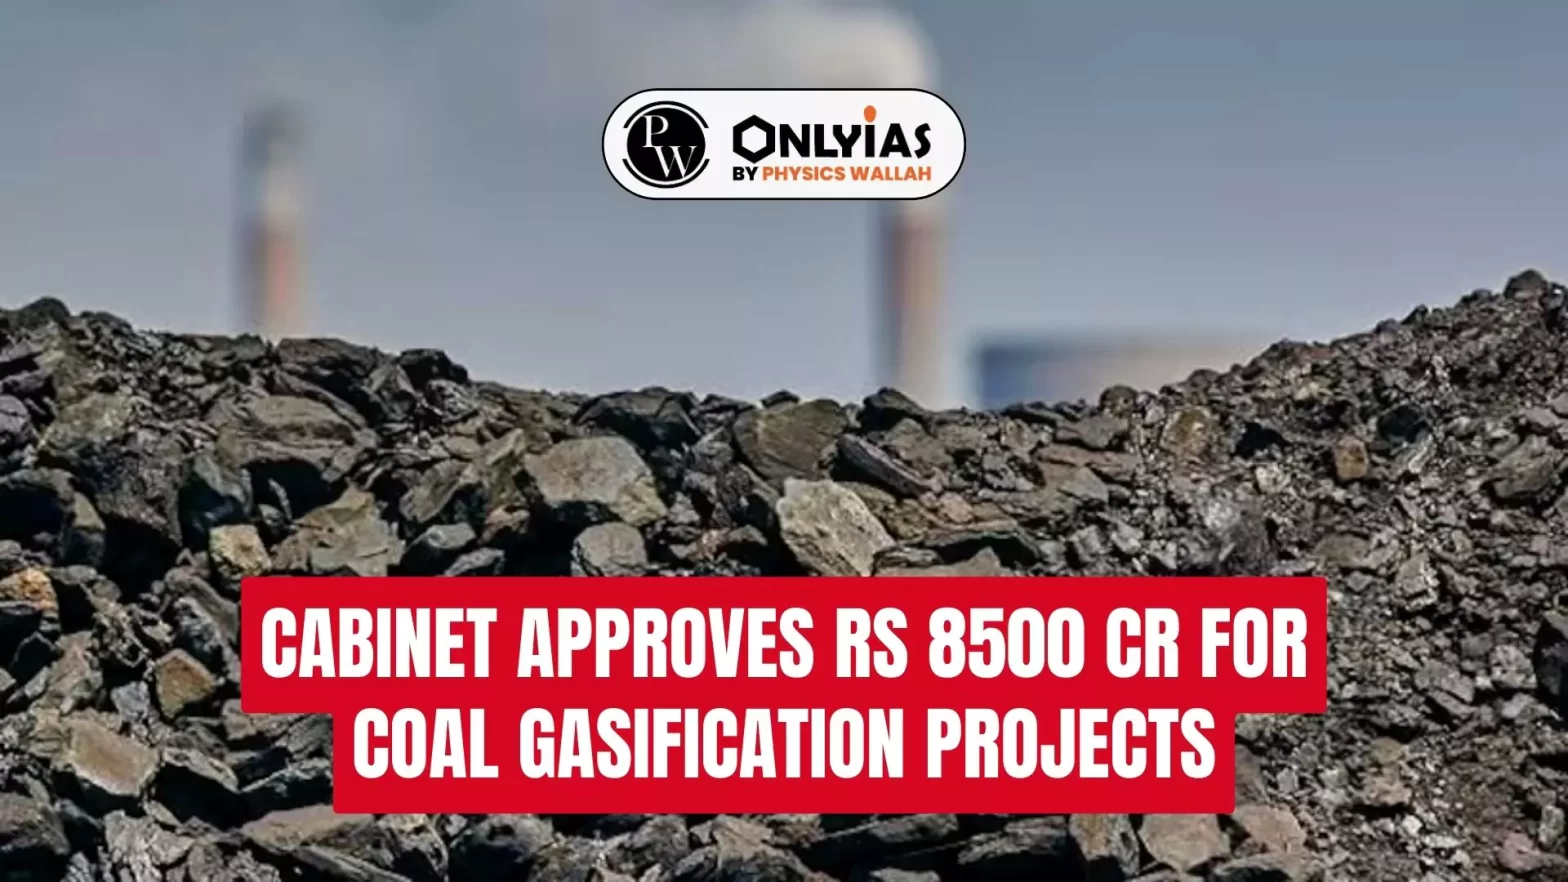 Cabinet Approves Rs 8500 Cr for Coal Gasification Projects